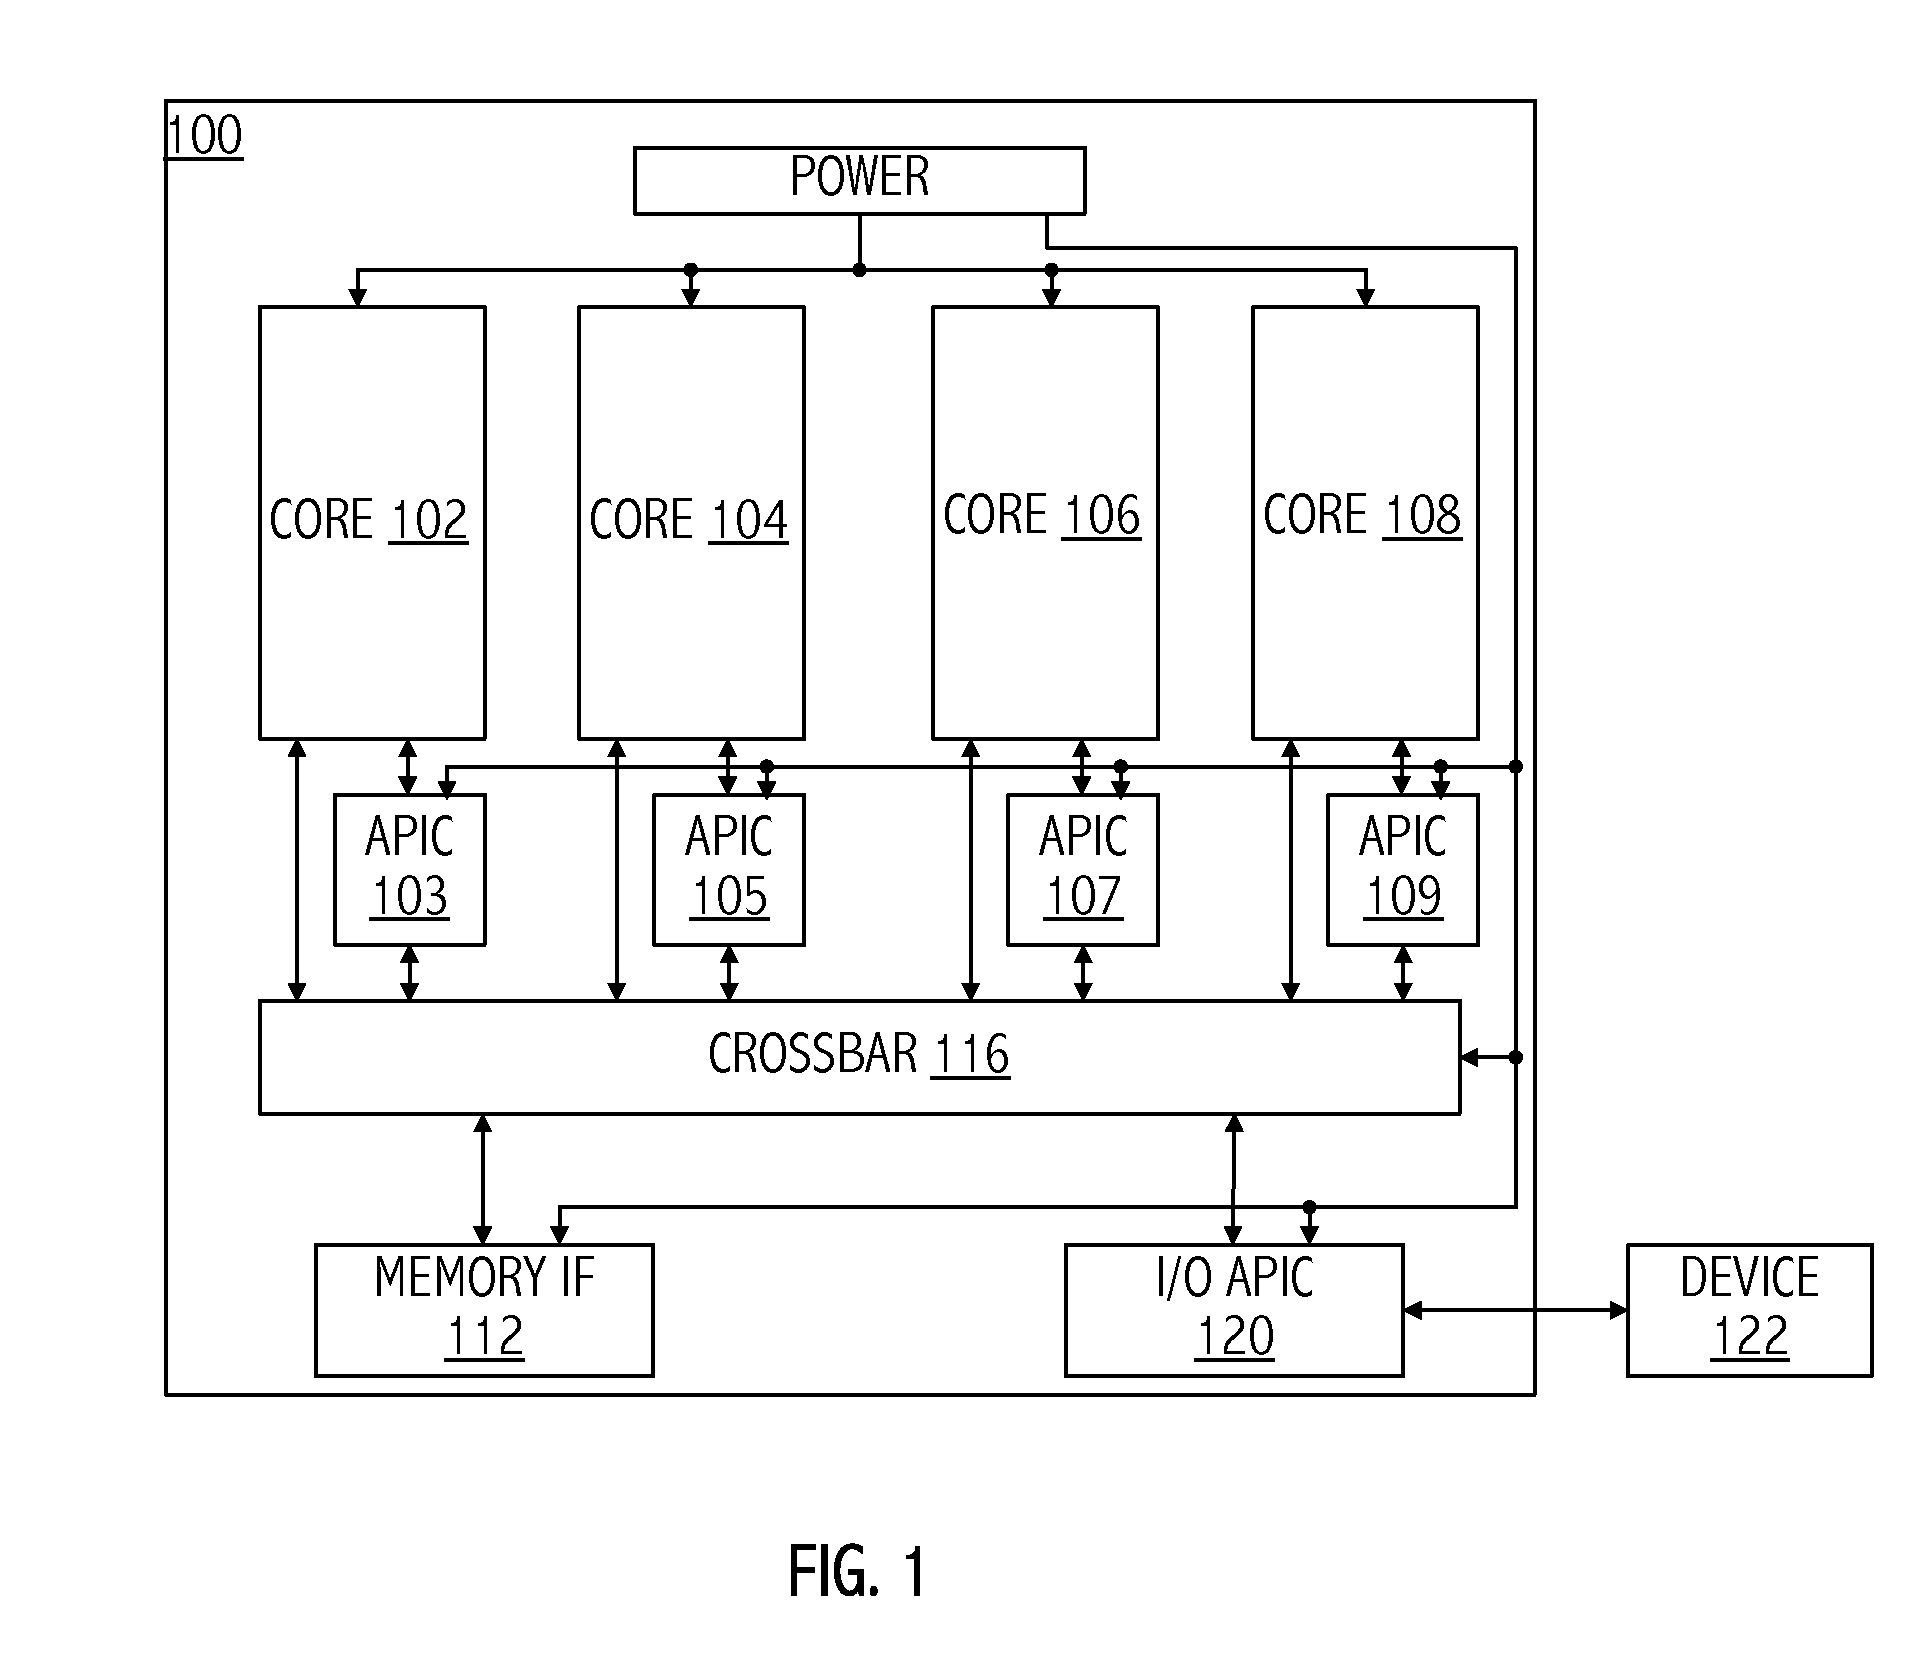 Mechanism for reducing interrupt latency and power consumption using heterogeneous cores